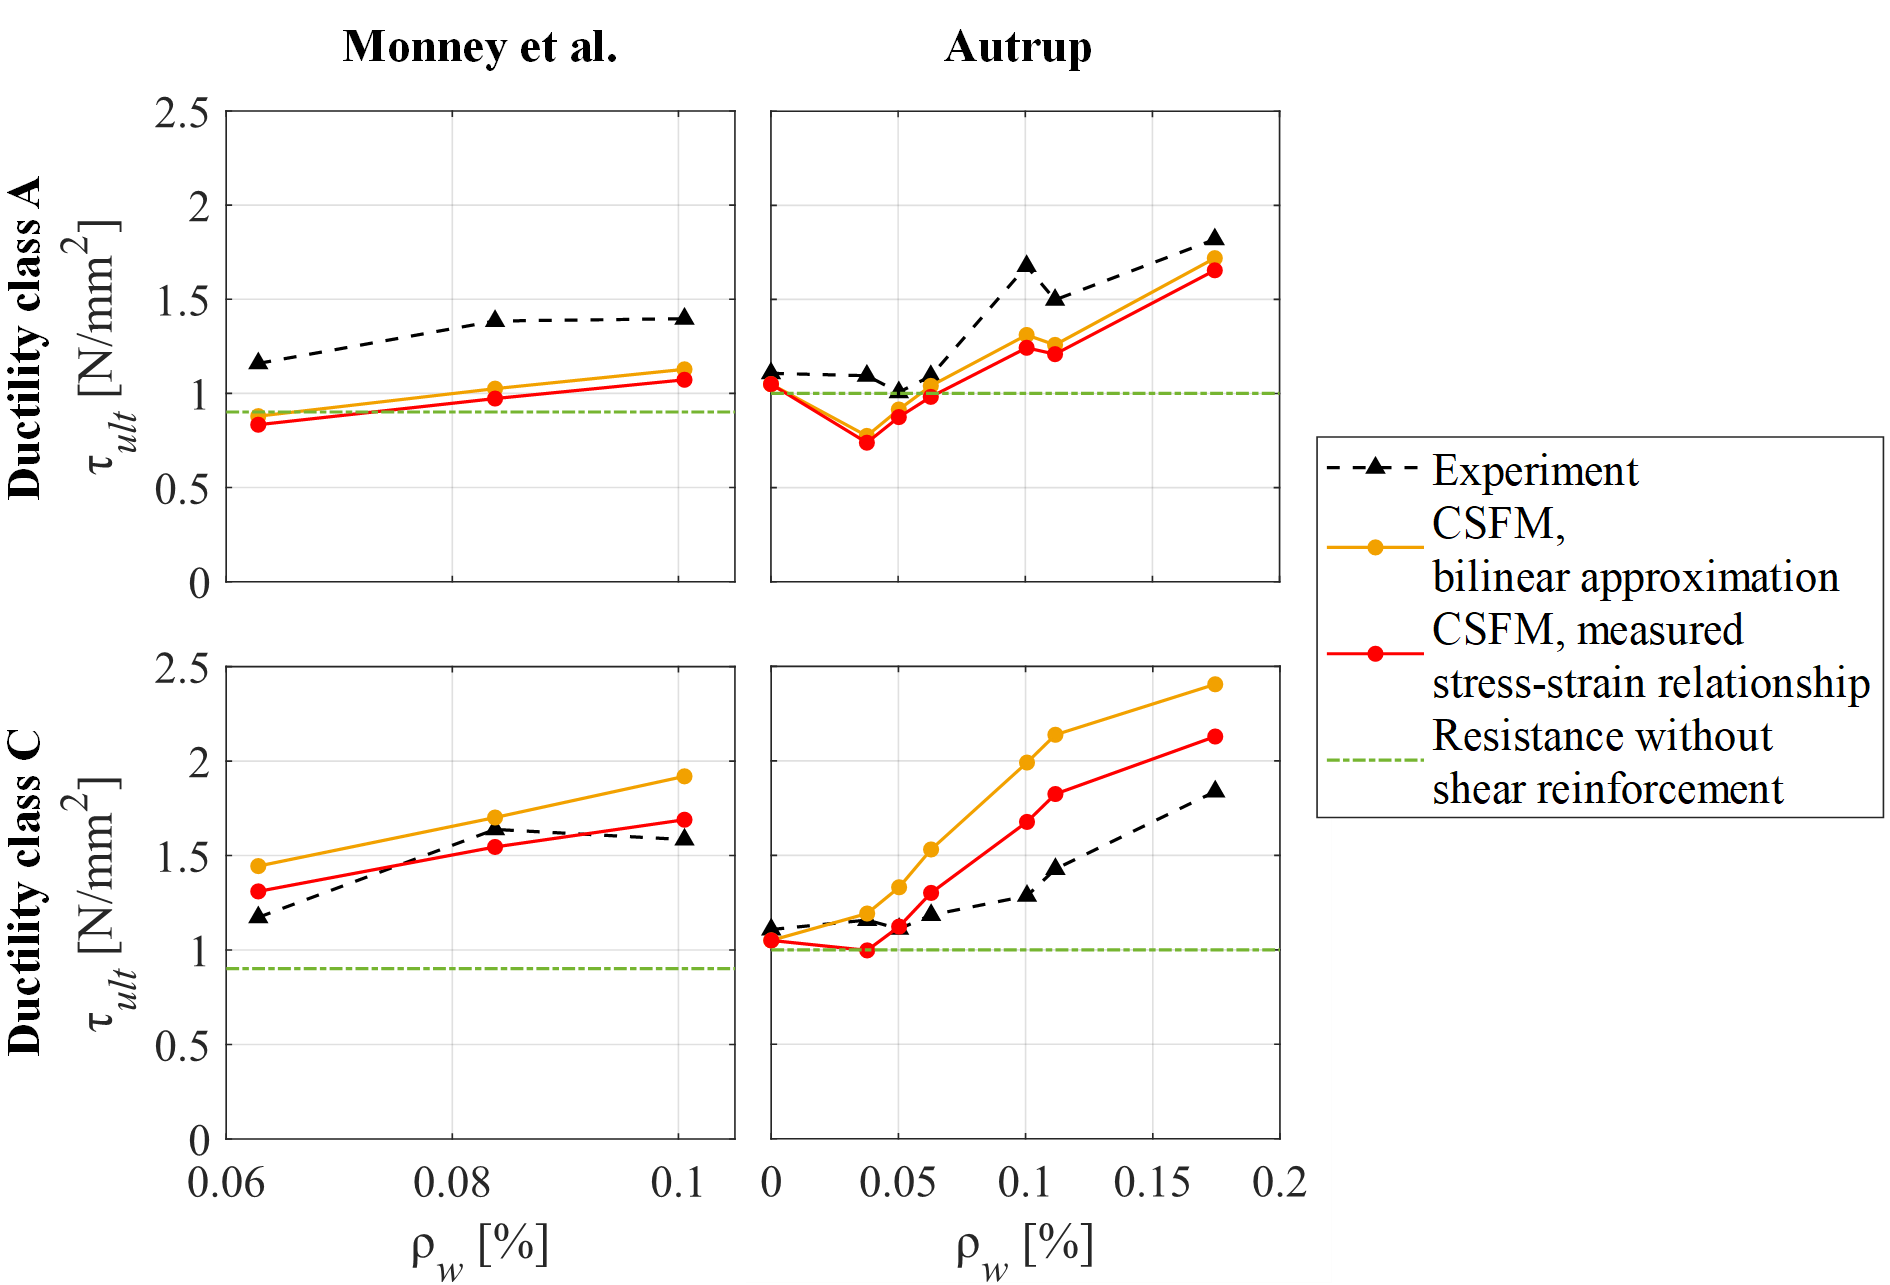 Influence of the assumed shape of the stress-strain relationship in the inelastic range on the shear resistance predicted by the CSFM.